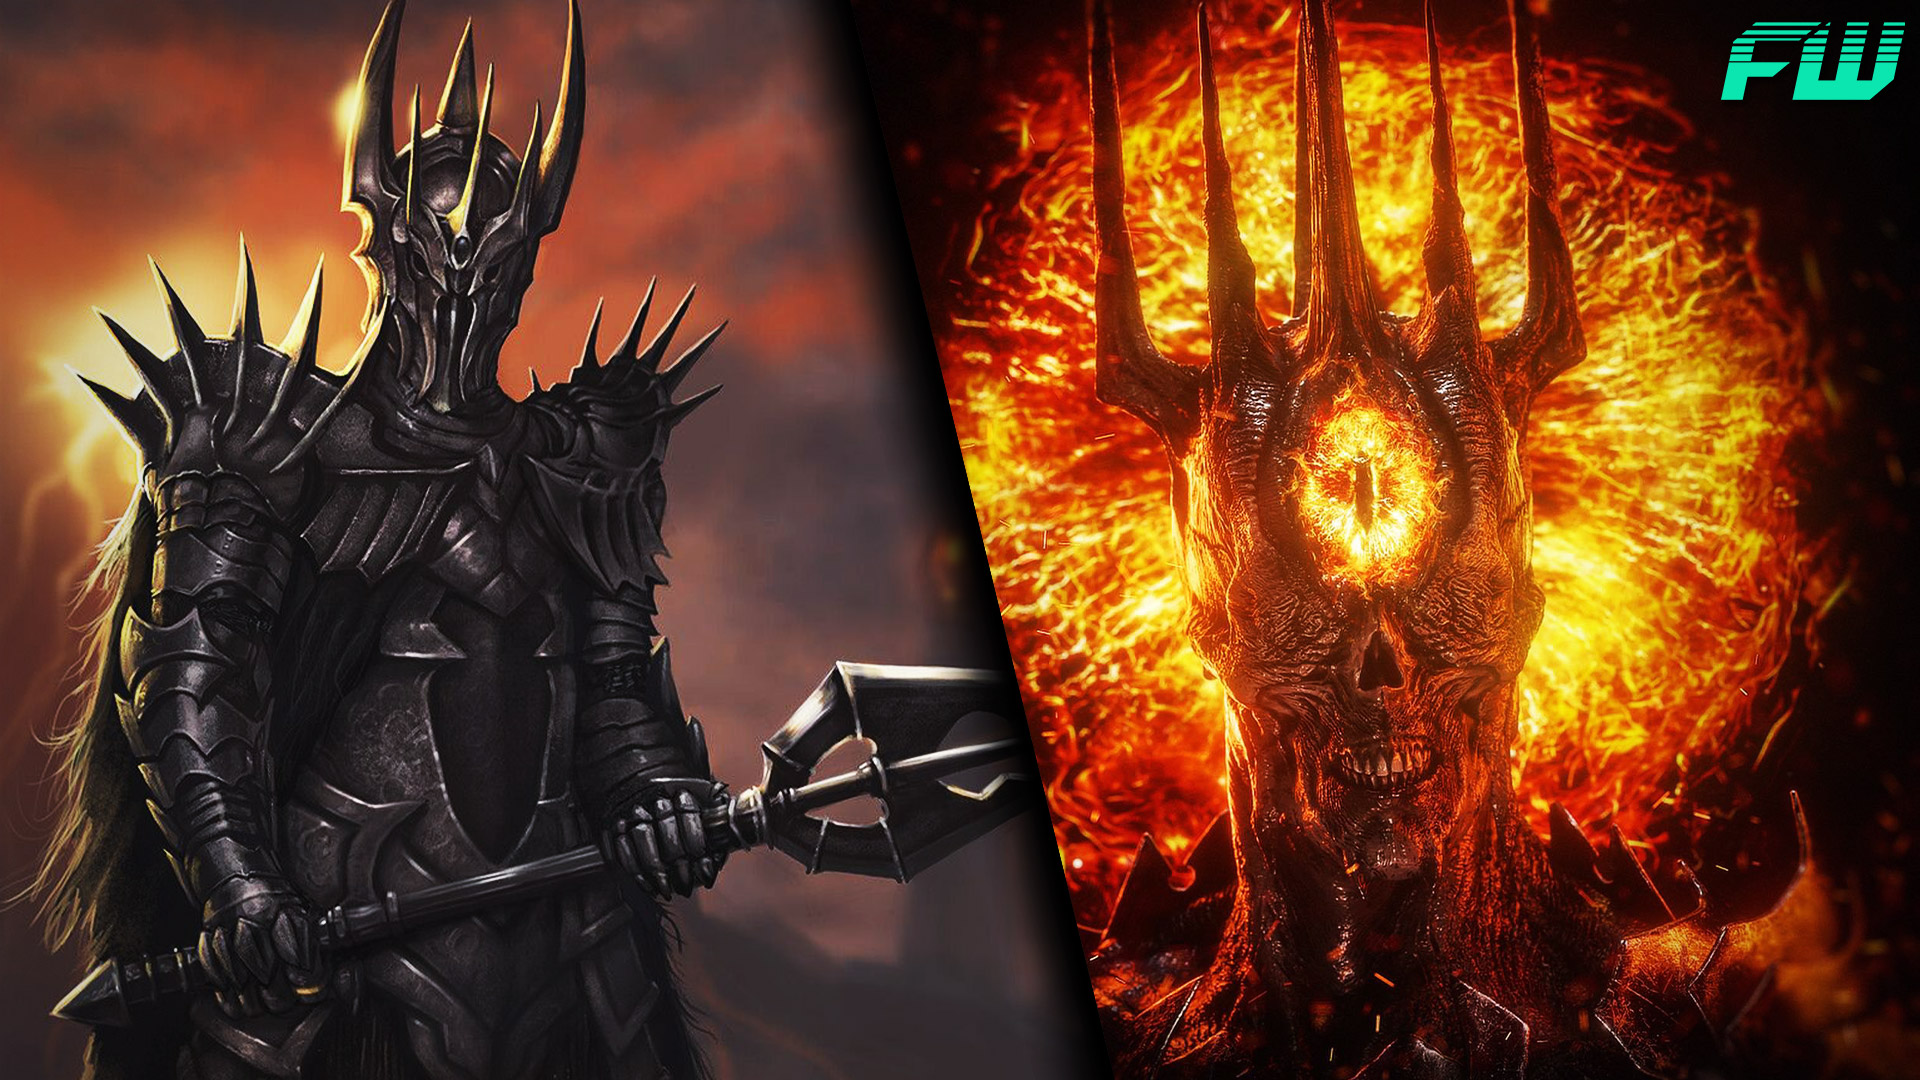 Sauron Rings Of Power Wiki AUTOMASITES